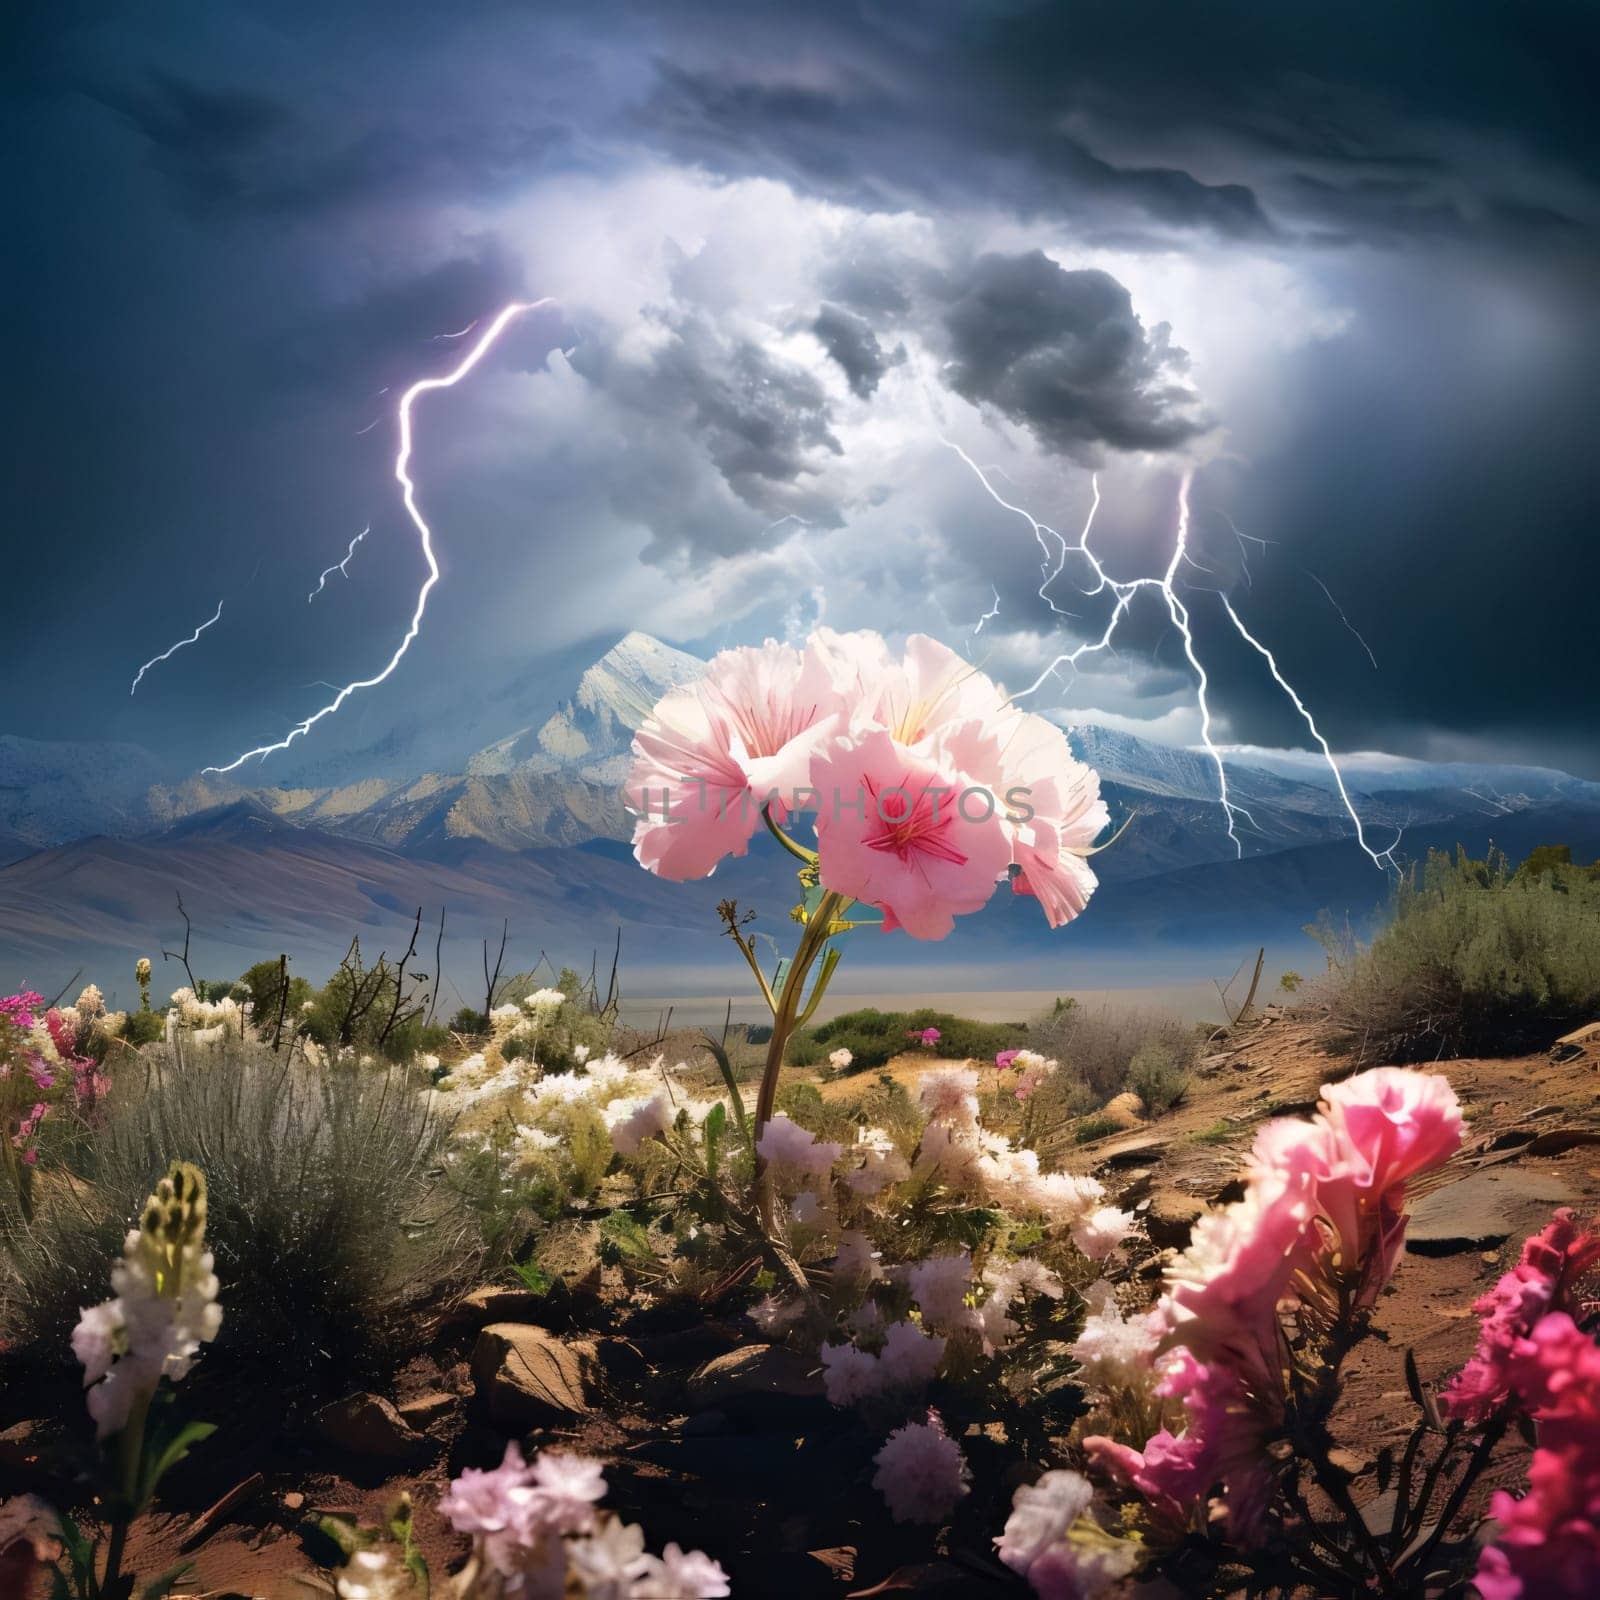 Growing pink flowers on dry mountain sands, high mountains in the distance and lightning clouded skies storm. Flowering flowers, a symbol of spring, new life. by ThemesS